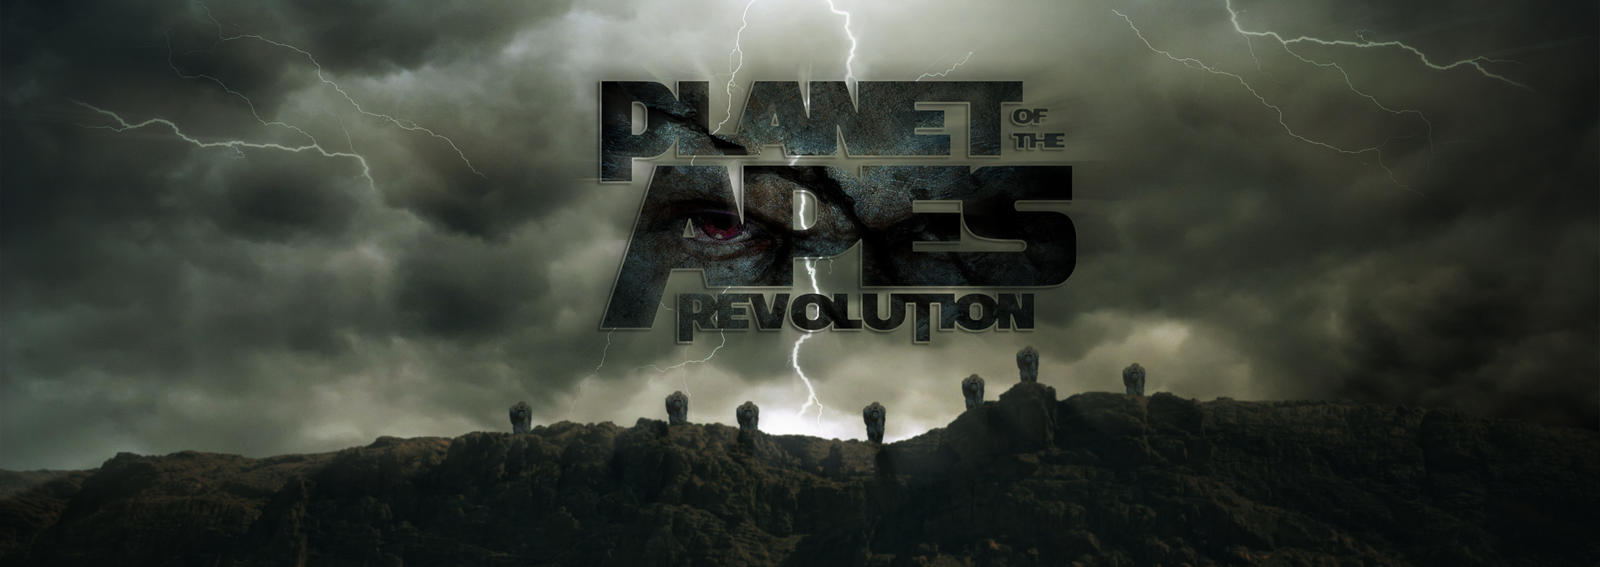 Planet of the apes: Revolution